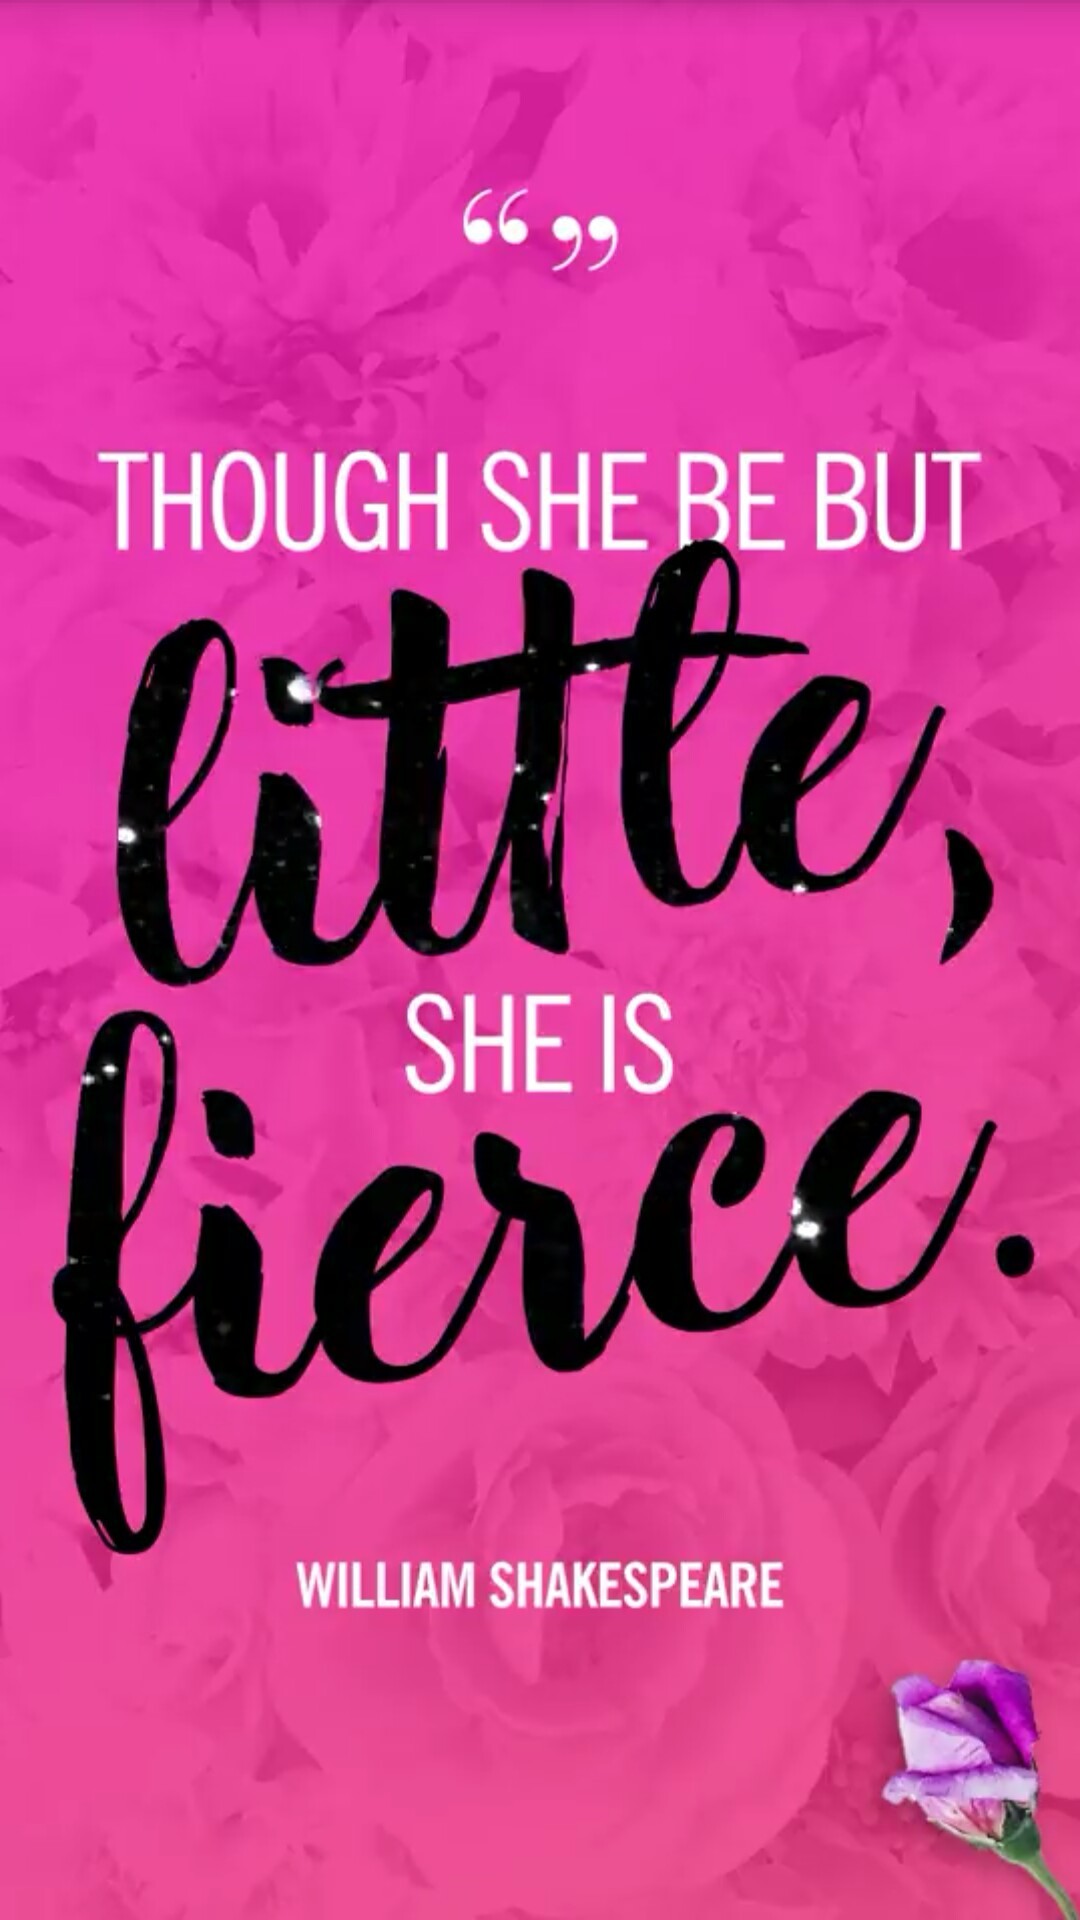 1080x1920 "Though she be but little, she is fierce" -William Shakespeare